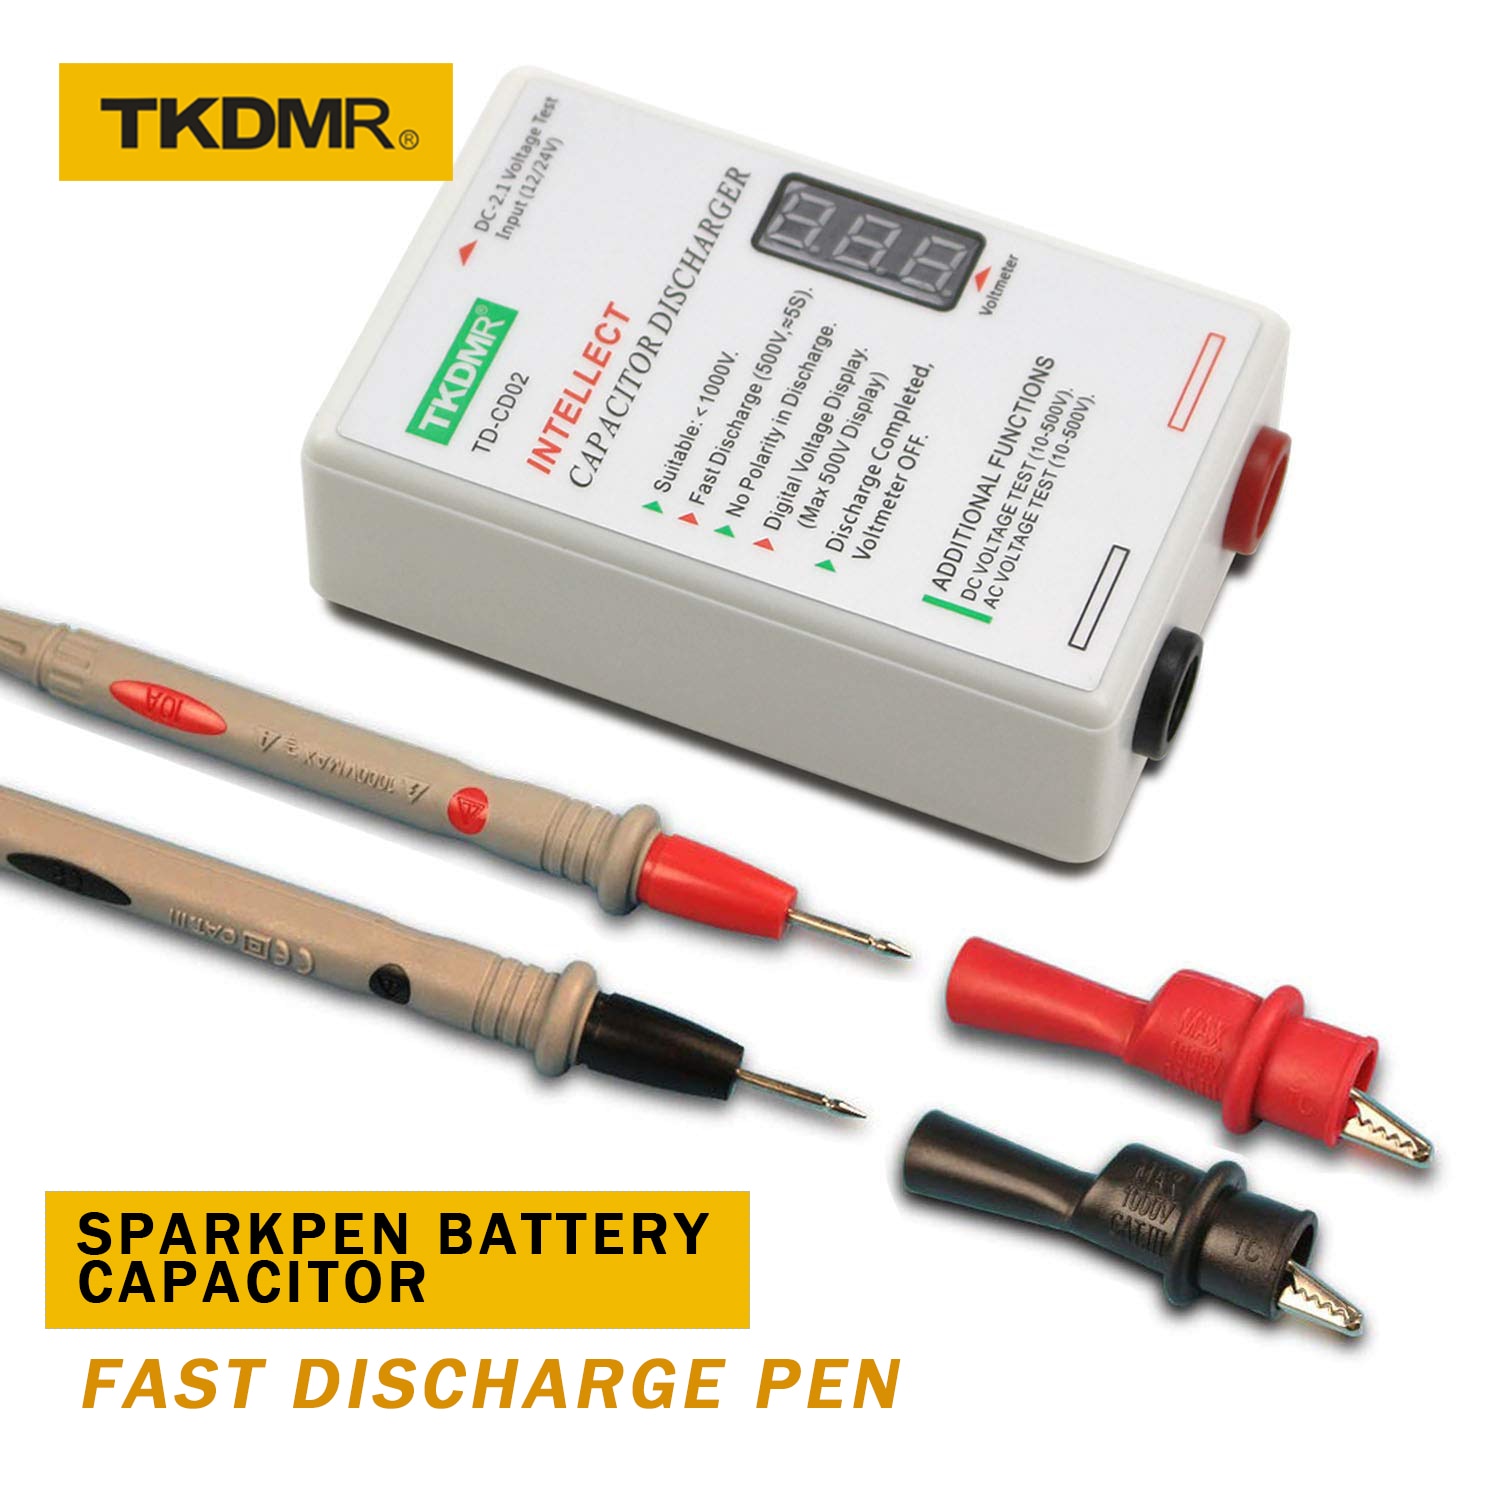 TKDMR Sparkpen Battery Capacitor Fast Discharge Pen - Discharger Protection Electrician Voltage Discharging Tool for Electronic